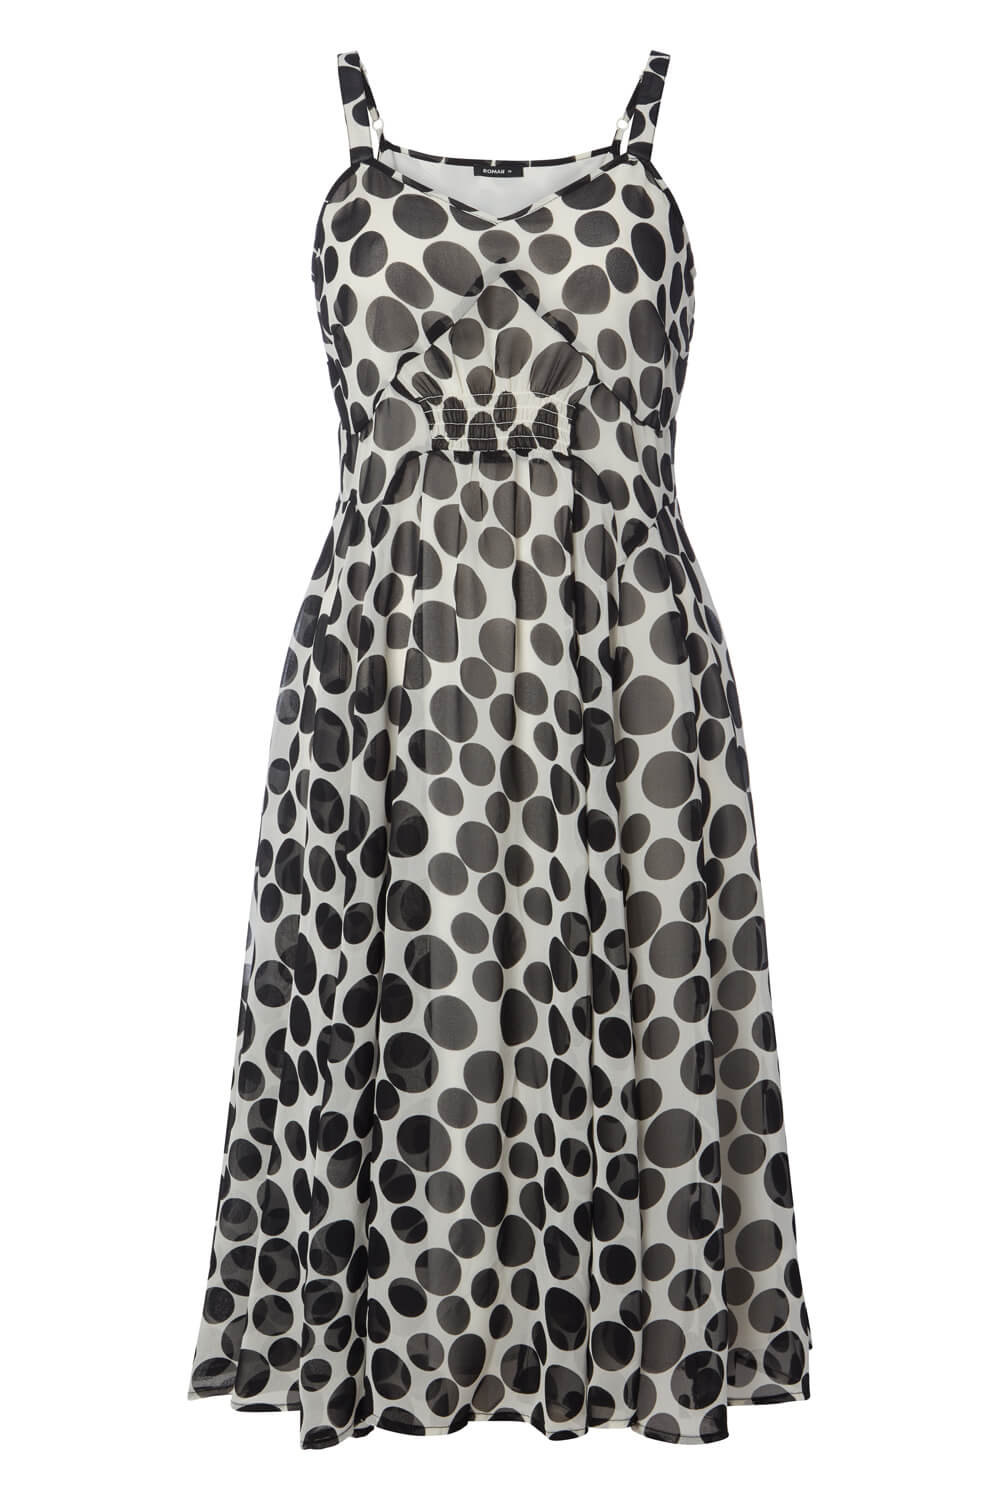 Ivory  Spot Print Fit and Flare Dress, Image 4 of 4